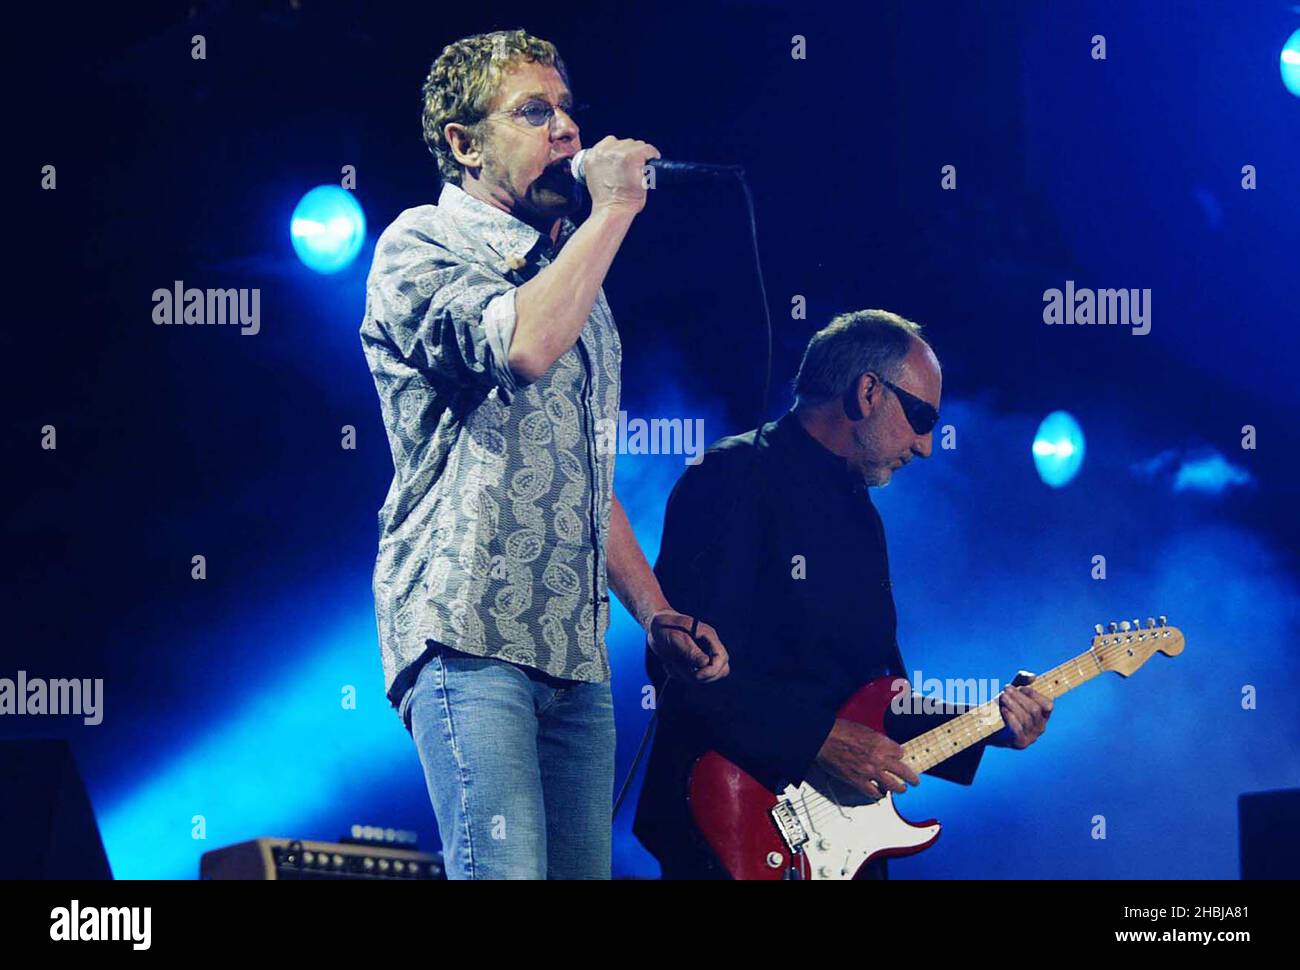 Roger Daltrey and Pete Townshend The Who live on stage headling Saturday at the Isle of Wight Festival. Stock Photo